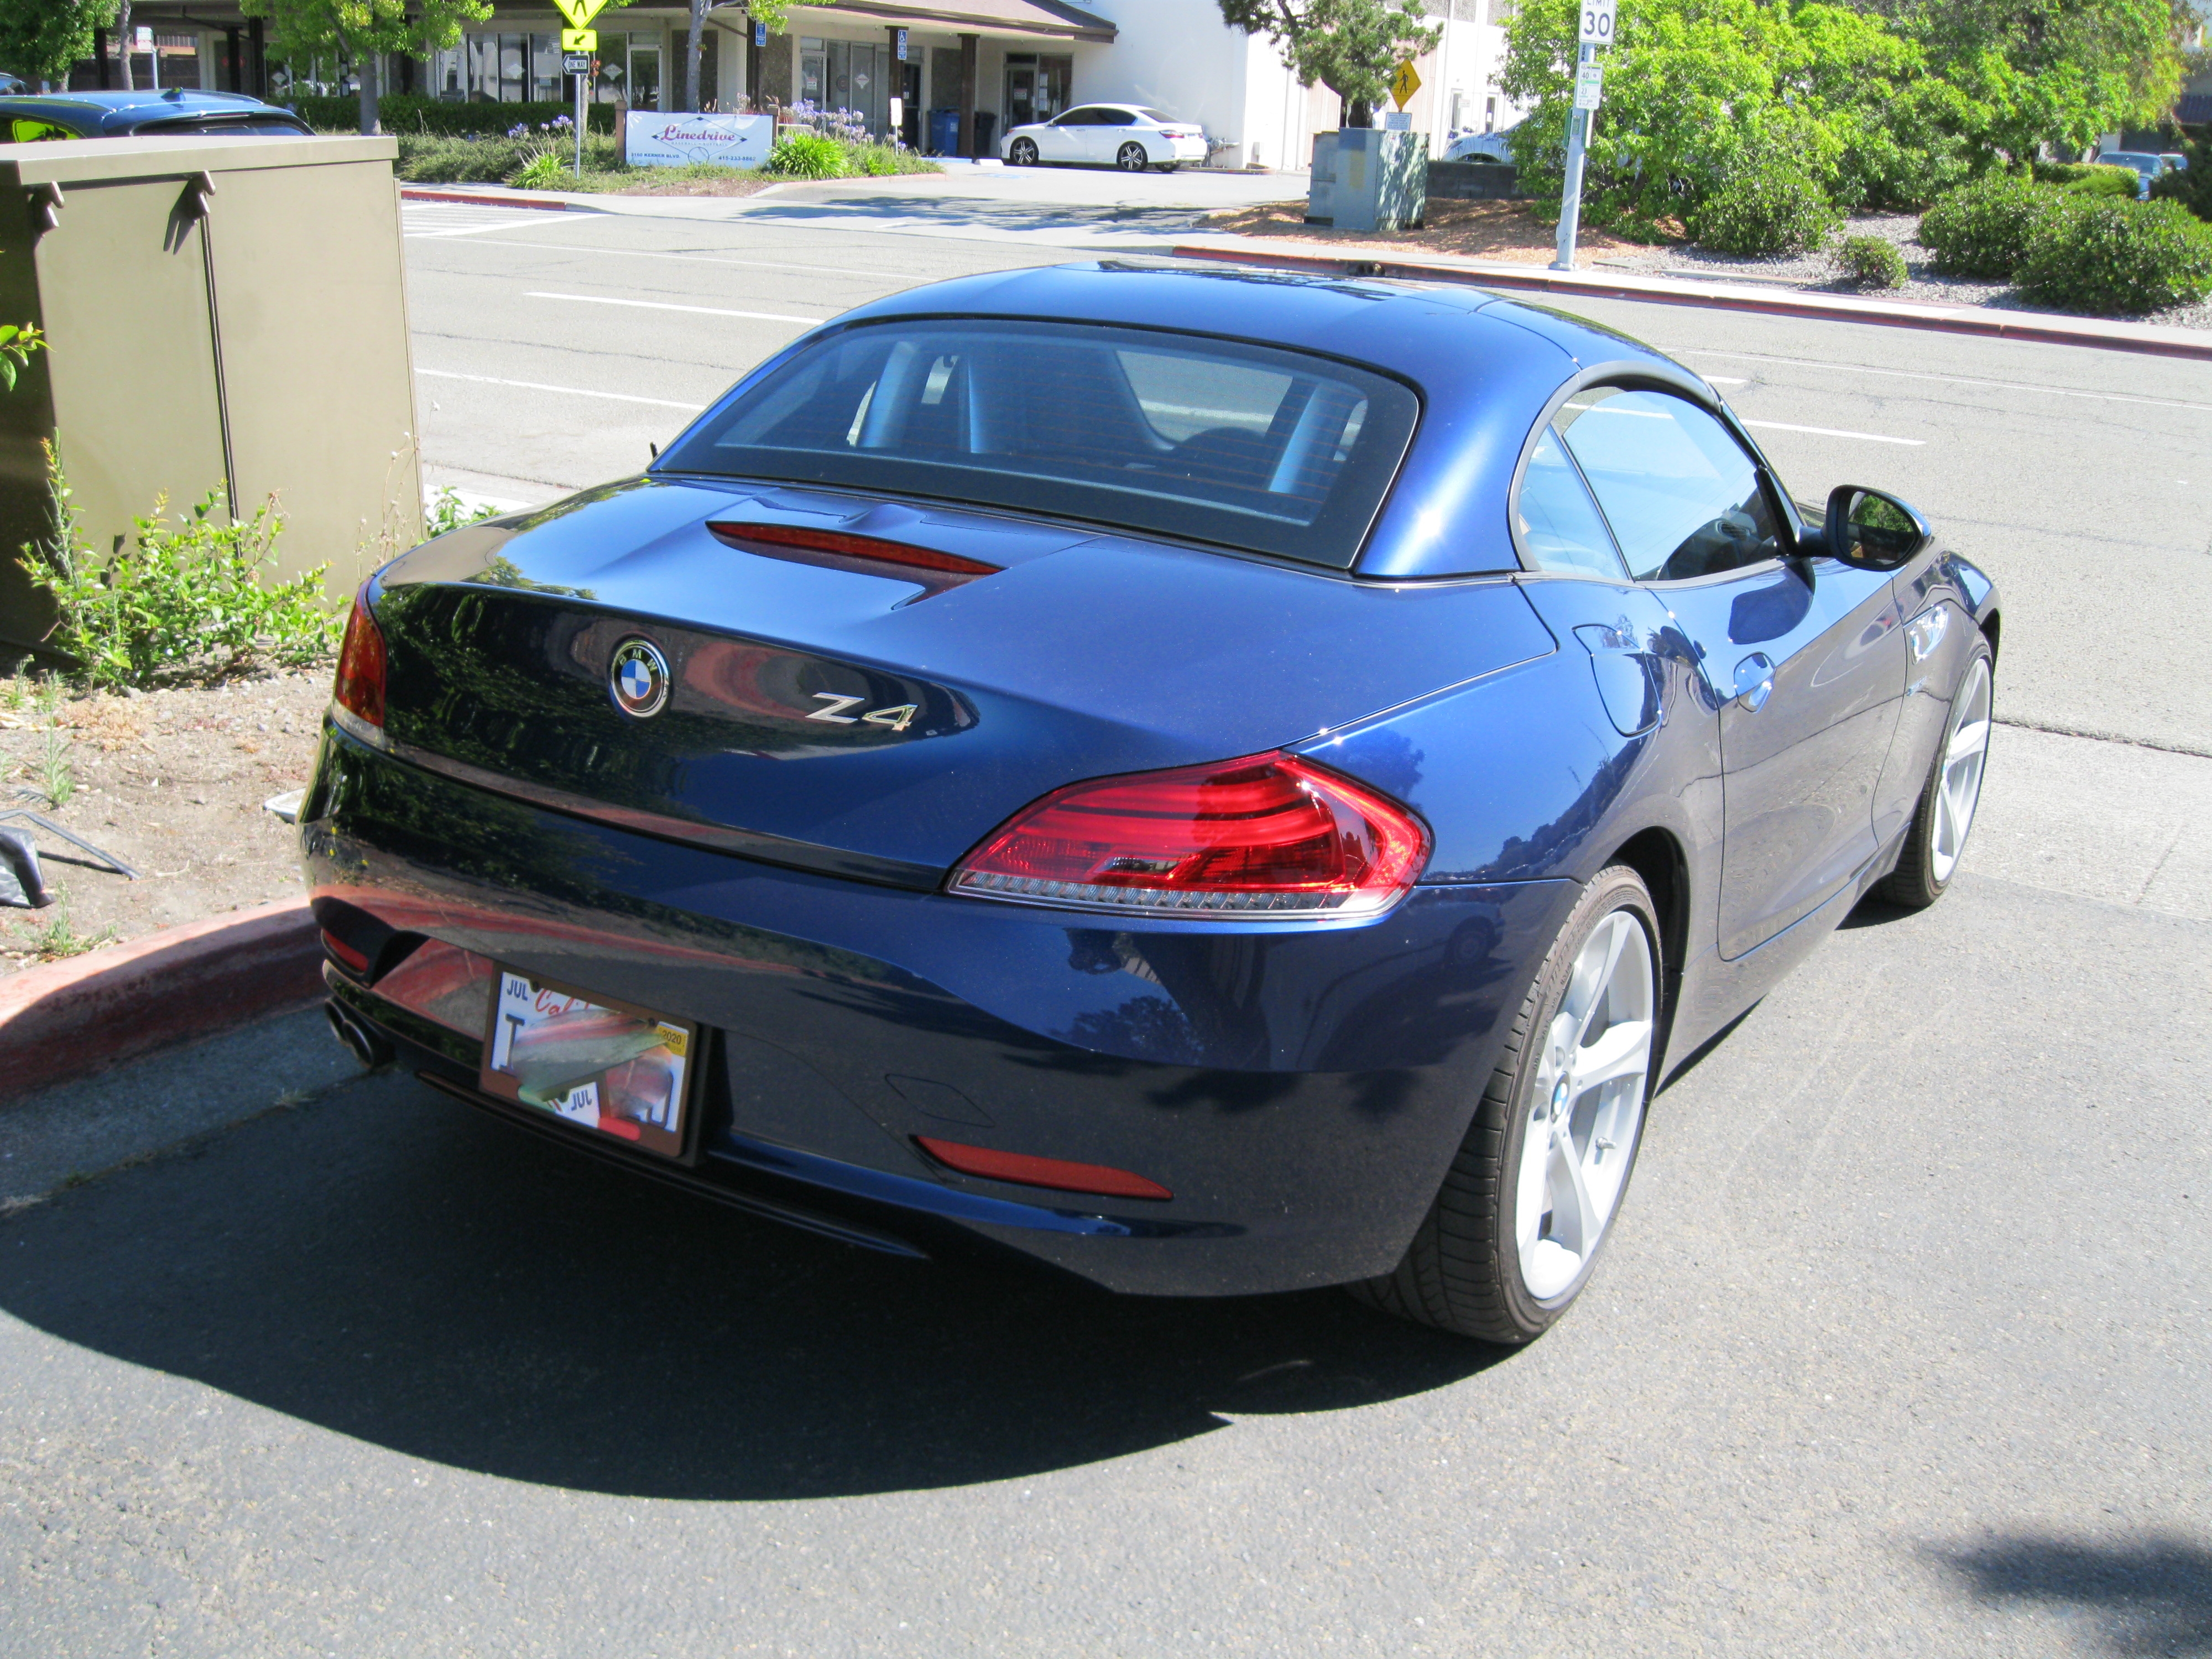 BMW Z4 Convertible Hard Top for Sale!